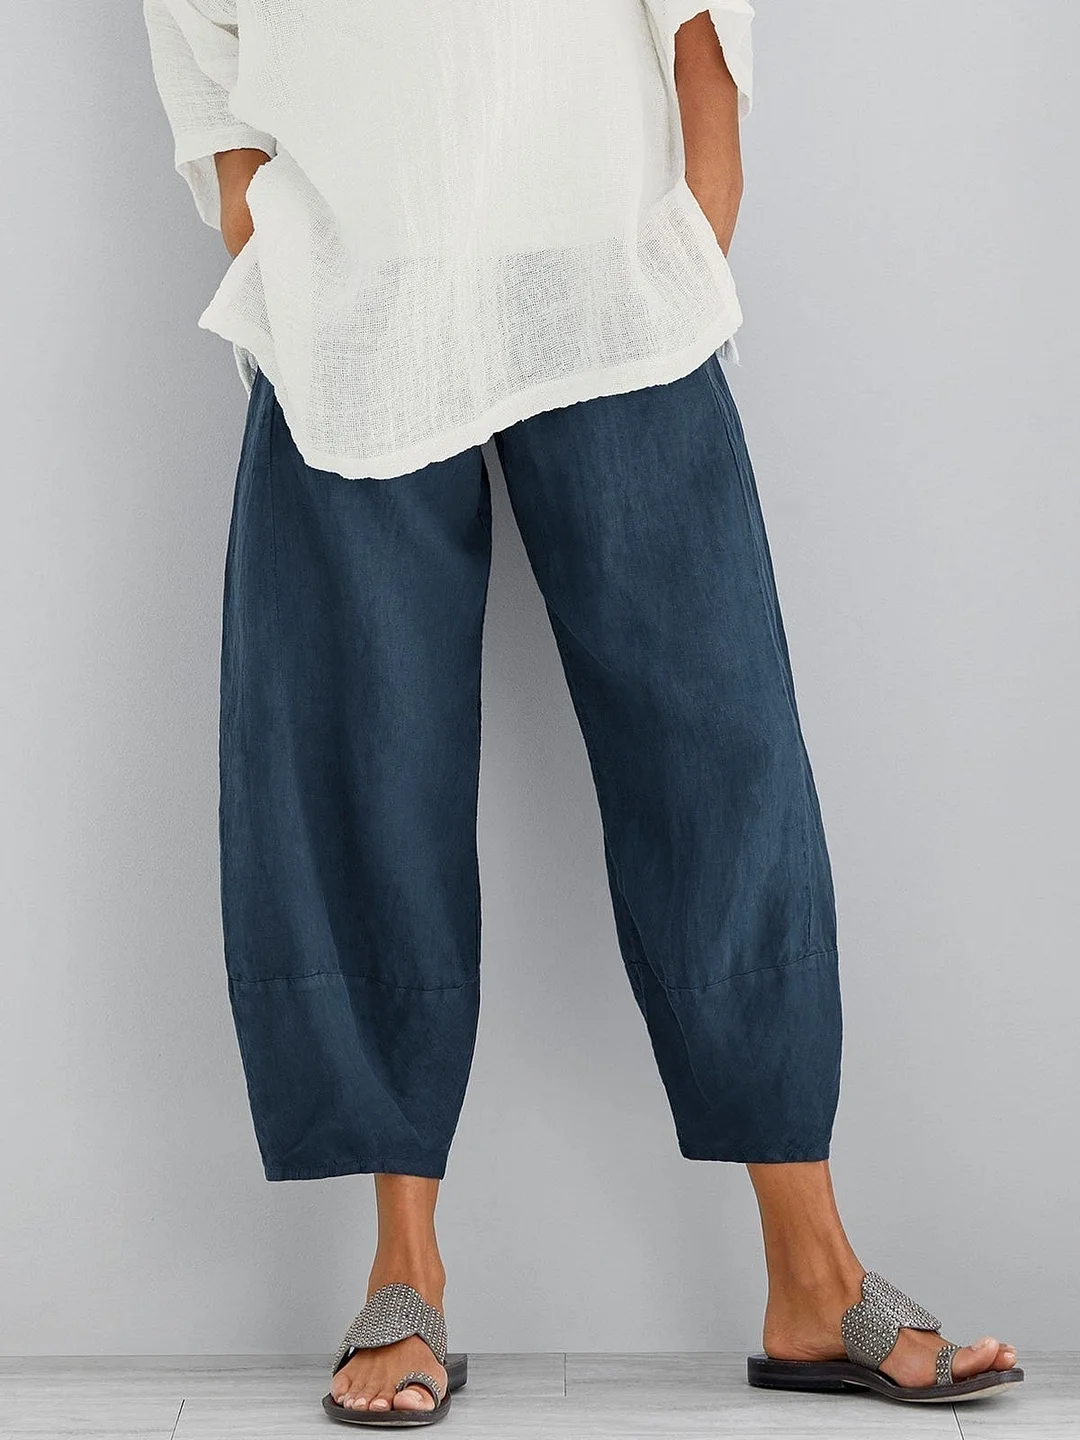 Casual Cropped Pants Cotton Trous ers In Navy Blue for Women